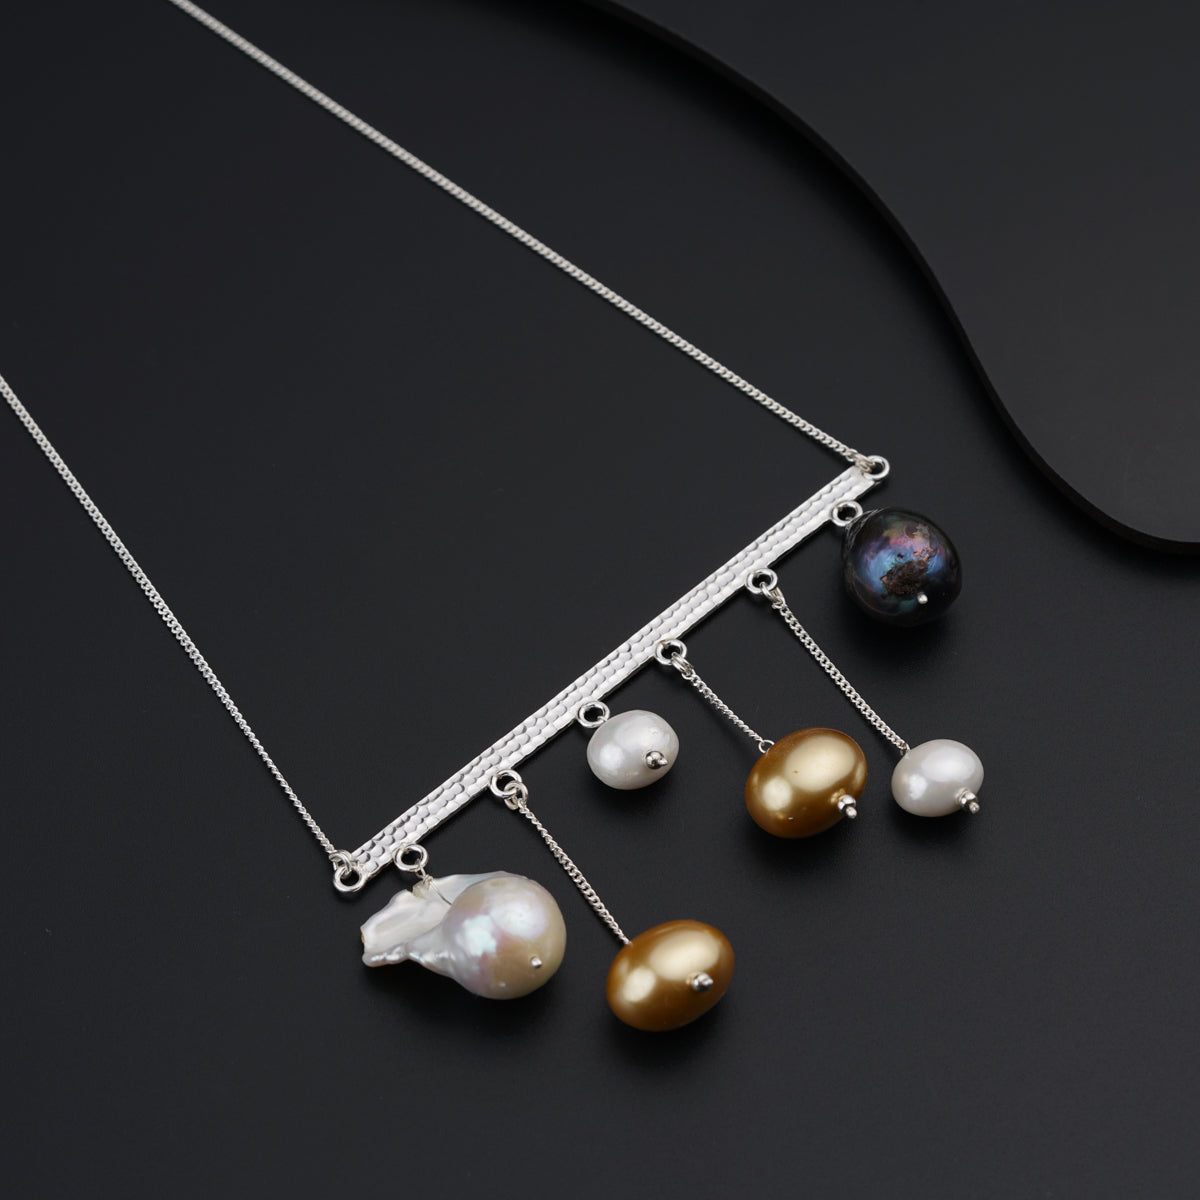 a necklace with five different pearls hanging from it